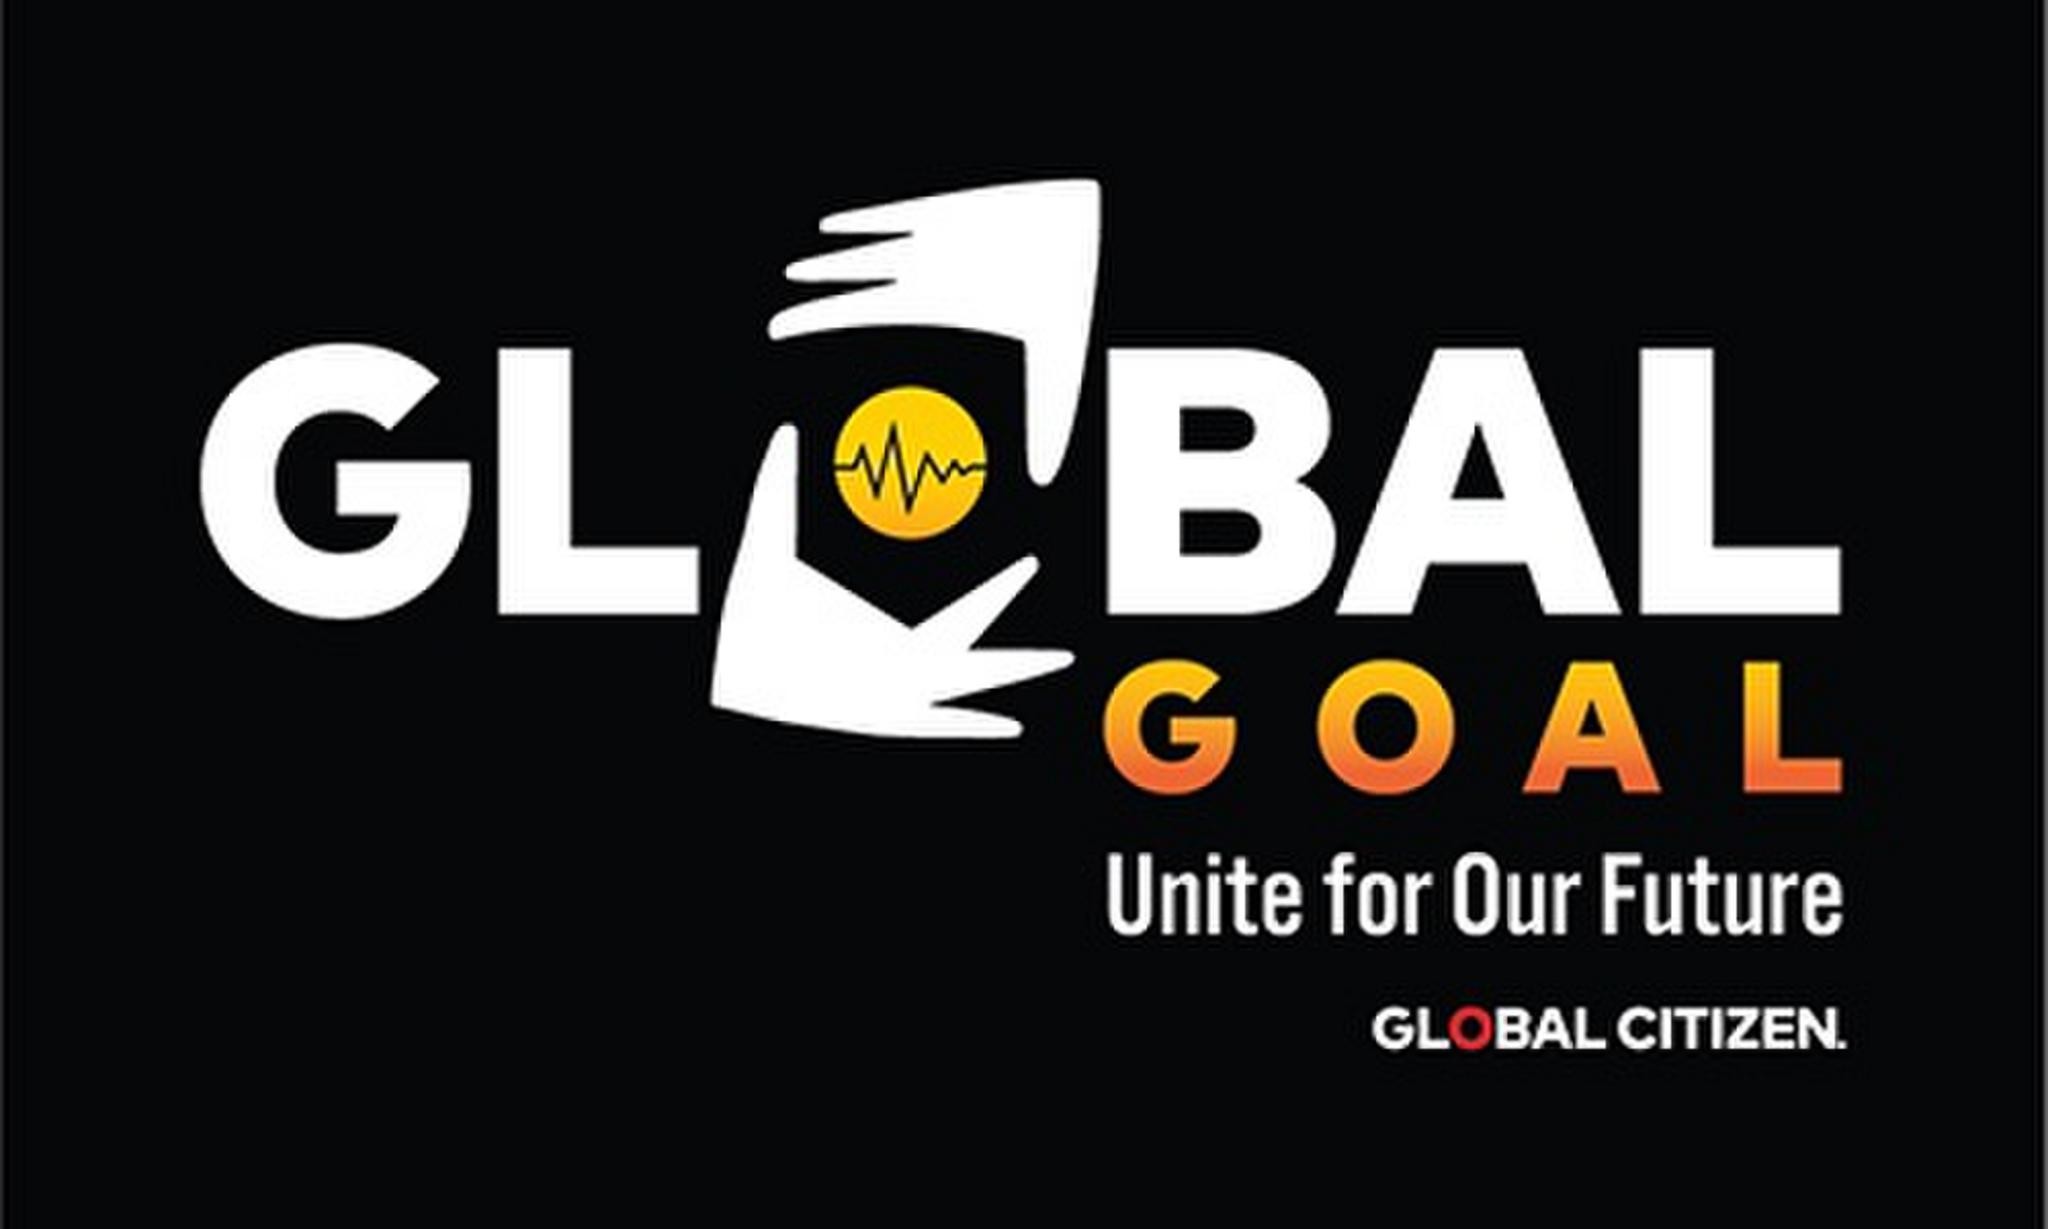 GLOBAL GOAL: UNITE FOR OUR FUTURE